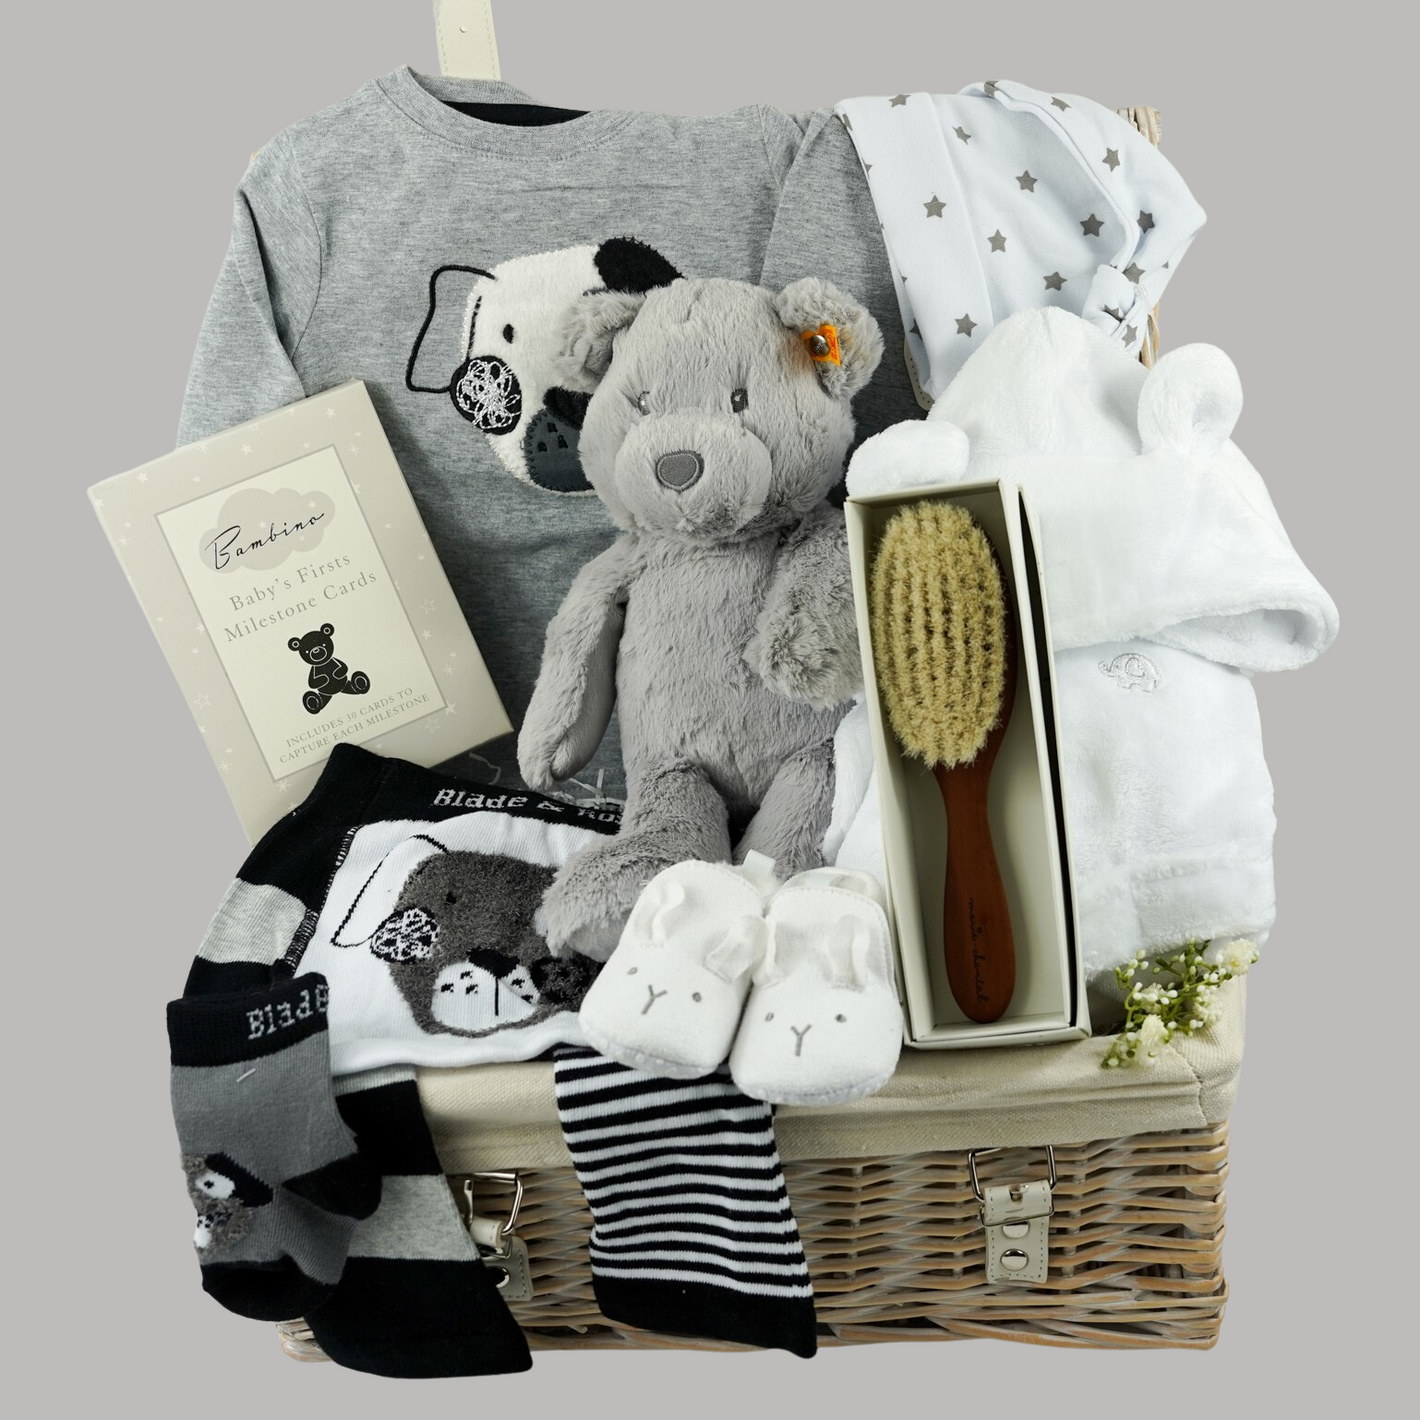 baby hamper basket with grey steiff teddy, grey and white 2 piece Blade and Rose outfit with a black and white dog, white baby slippers with ears, white baby dressing gown with ears , soft natural baby hairbrush, white with grey stars knot hat 